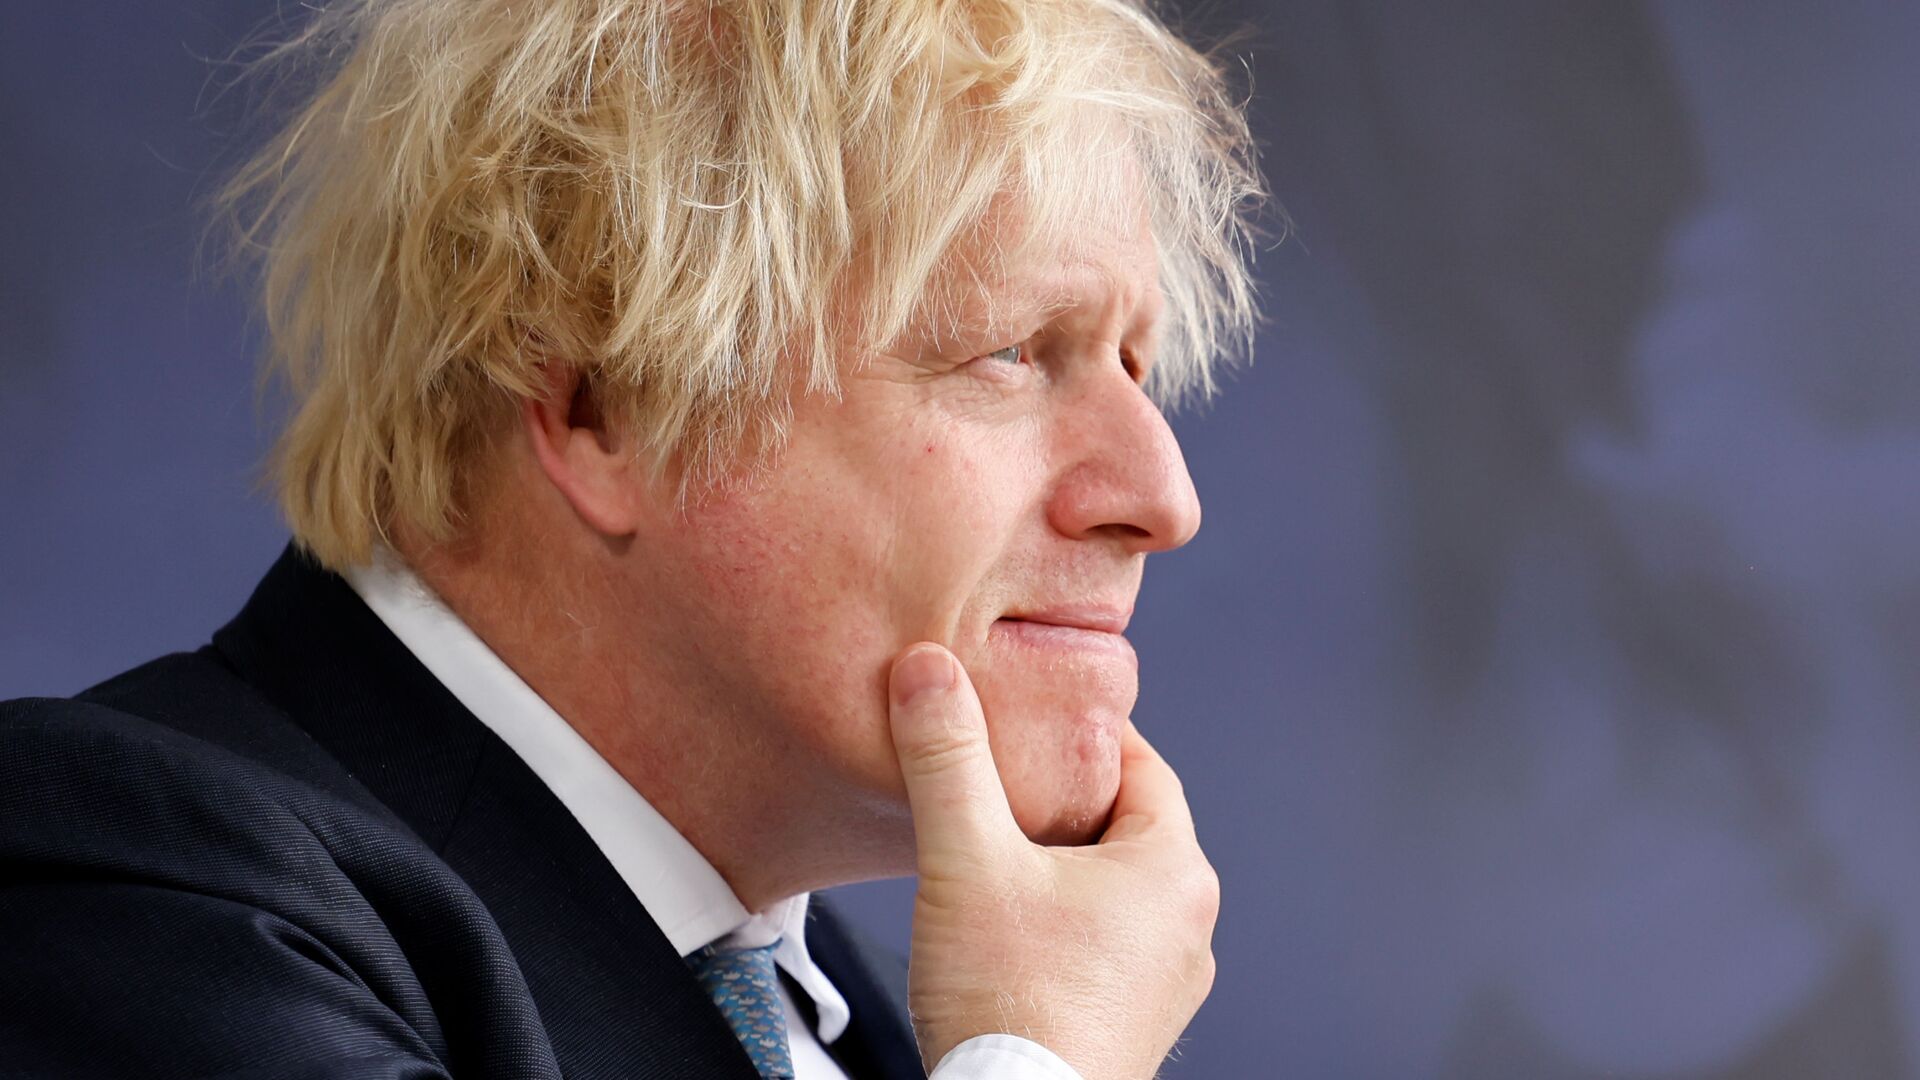 Britain's Prime Minister Boris Johnson arrives on the second day of the Global Education Summit in London, Britain July 29, 2021 - Sputnik International, 1920, 22.01.2022